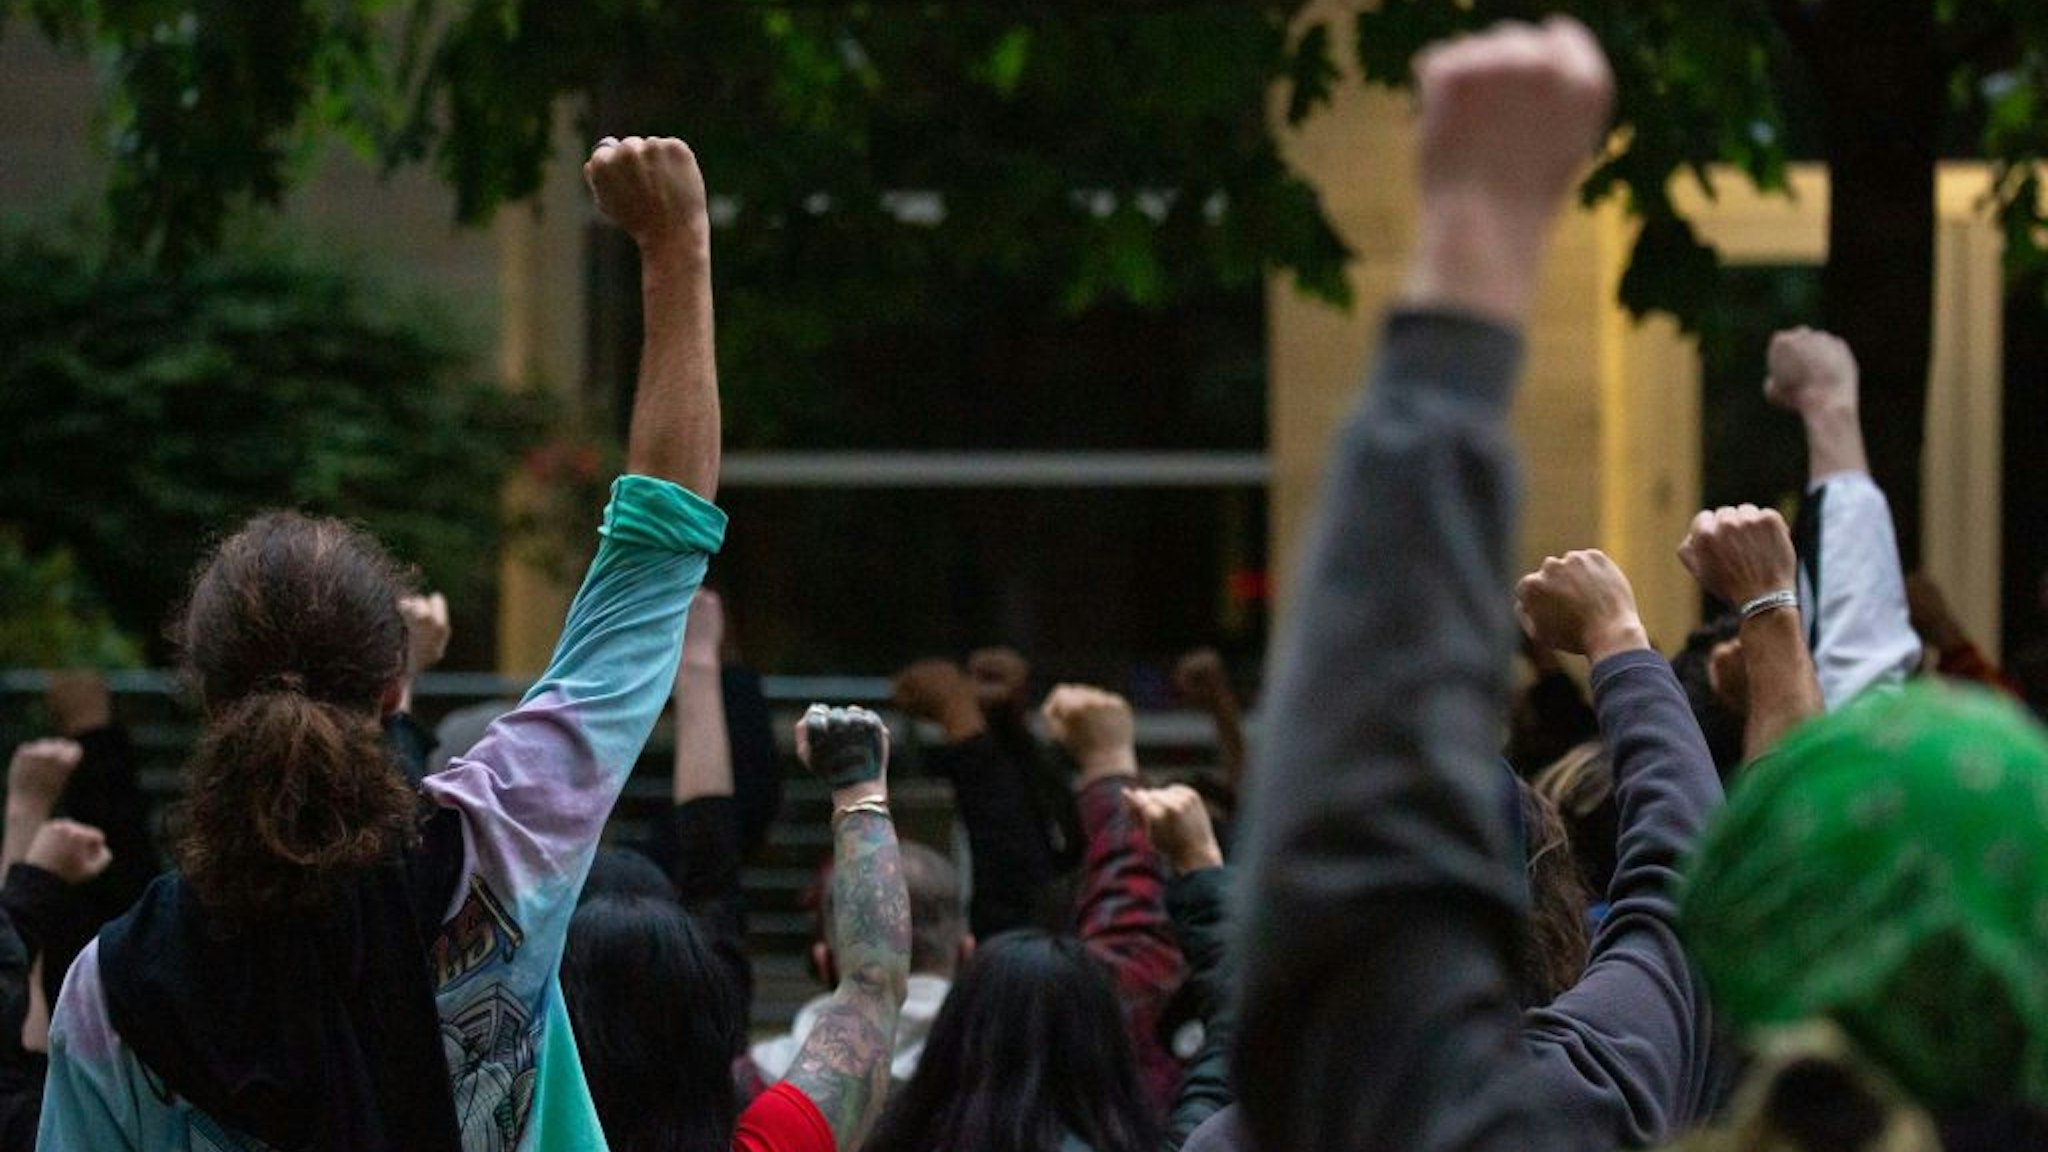 Protesters gather at the Seattle Police Department's West Precinct after marching from the police-free zone known as the Capitol Hill Organized Protest (CHOP) on June 15, 2020 in Seattle, Washington.